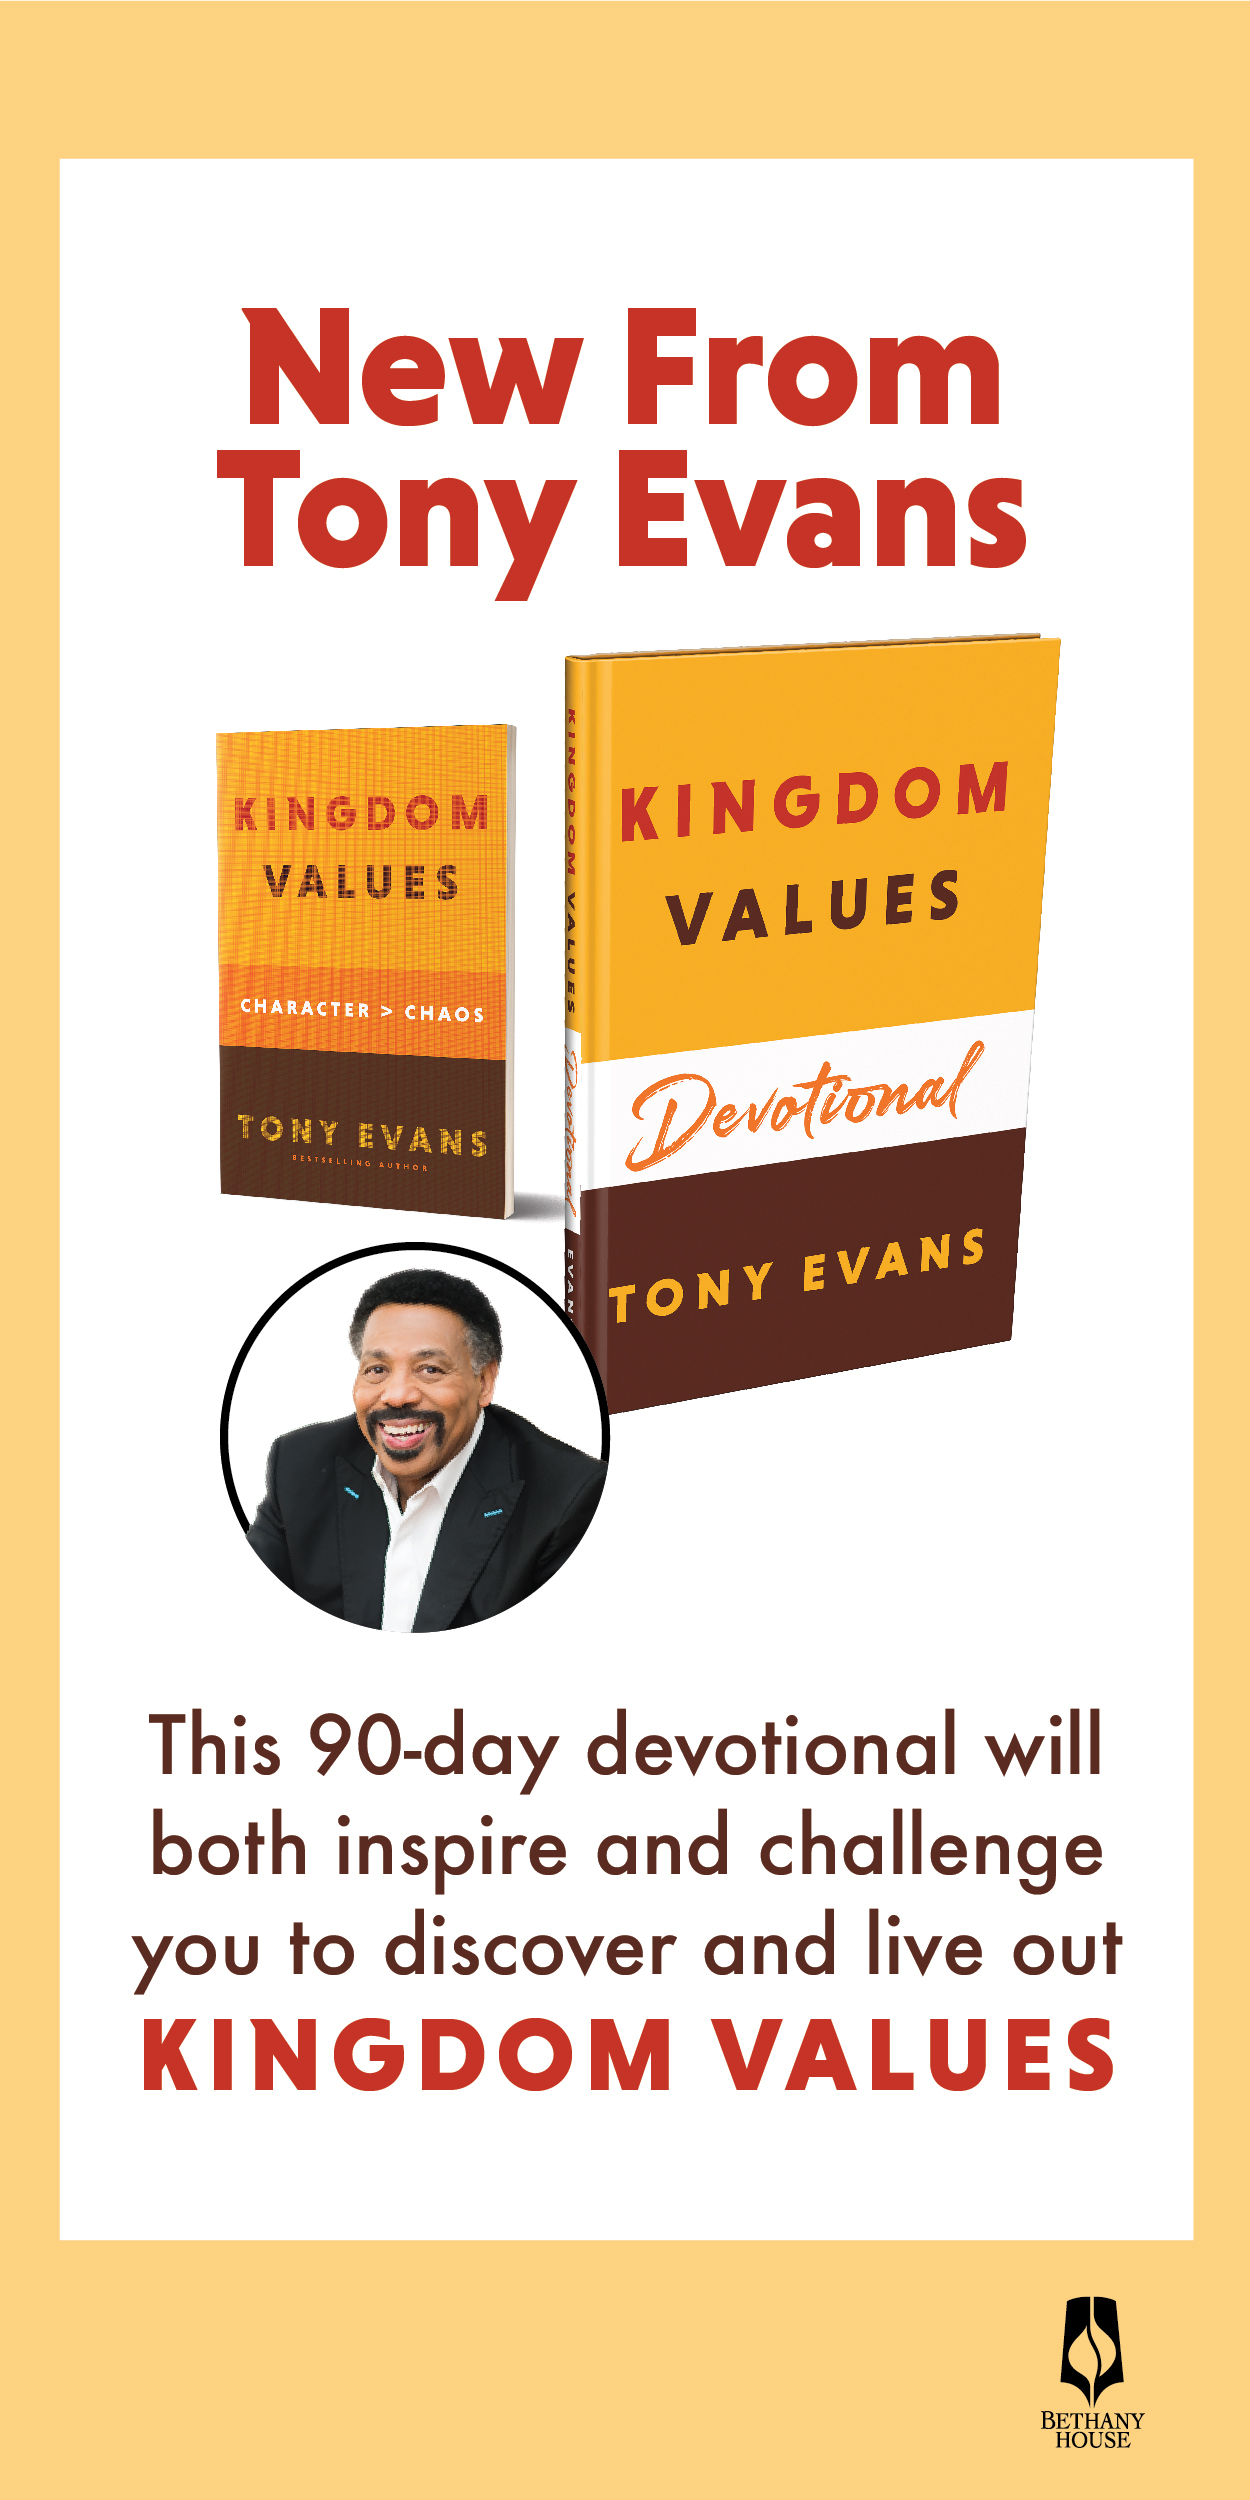 For Your Spiritual Benefit, Dr. Tony Evans Introduces A Companion Devotional to the Tony Evans’s Kingdom Values Book. This Book is About Having Character Over Chaos and Living Out God’s Kingdom Principles Day-by-Day.